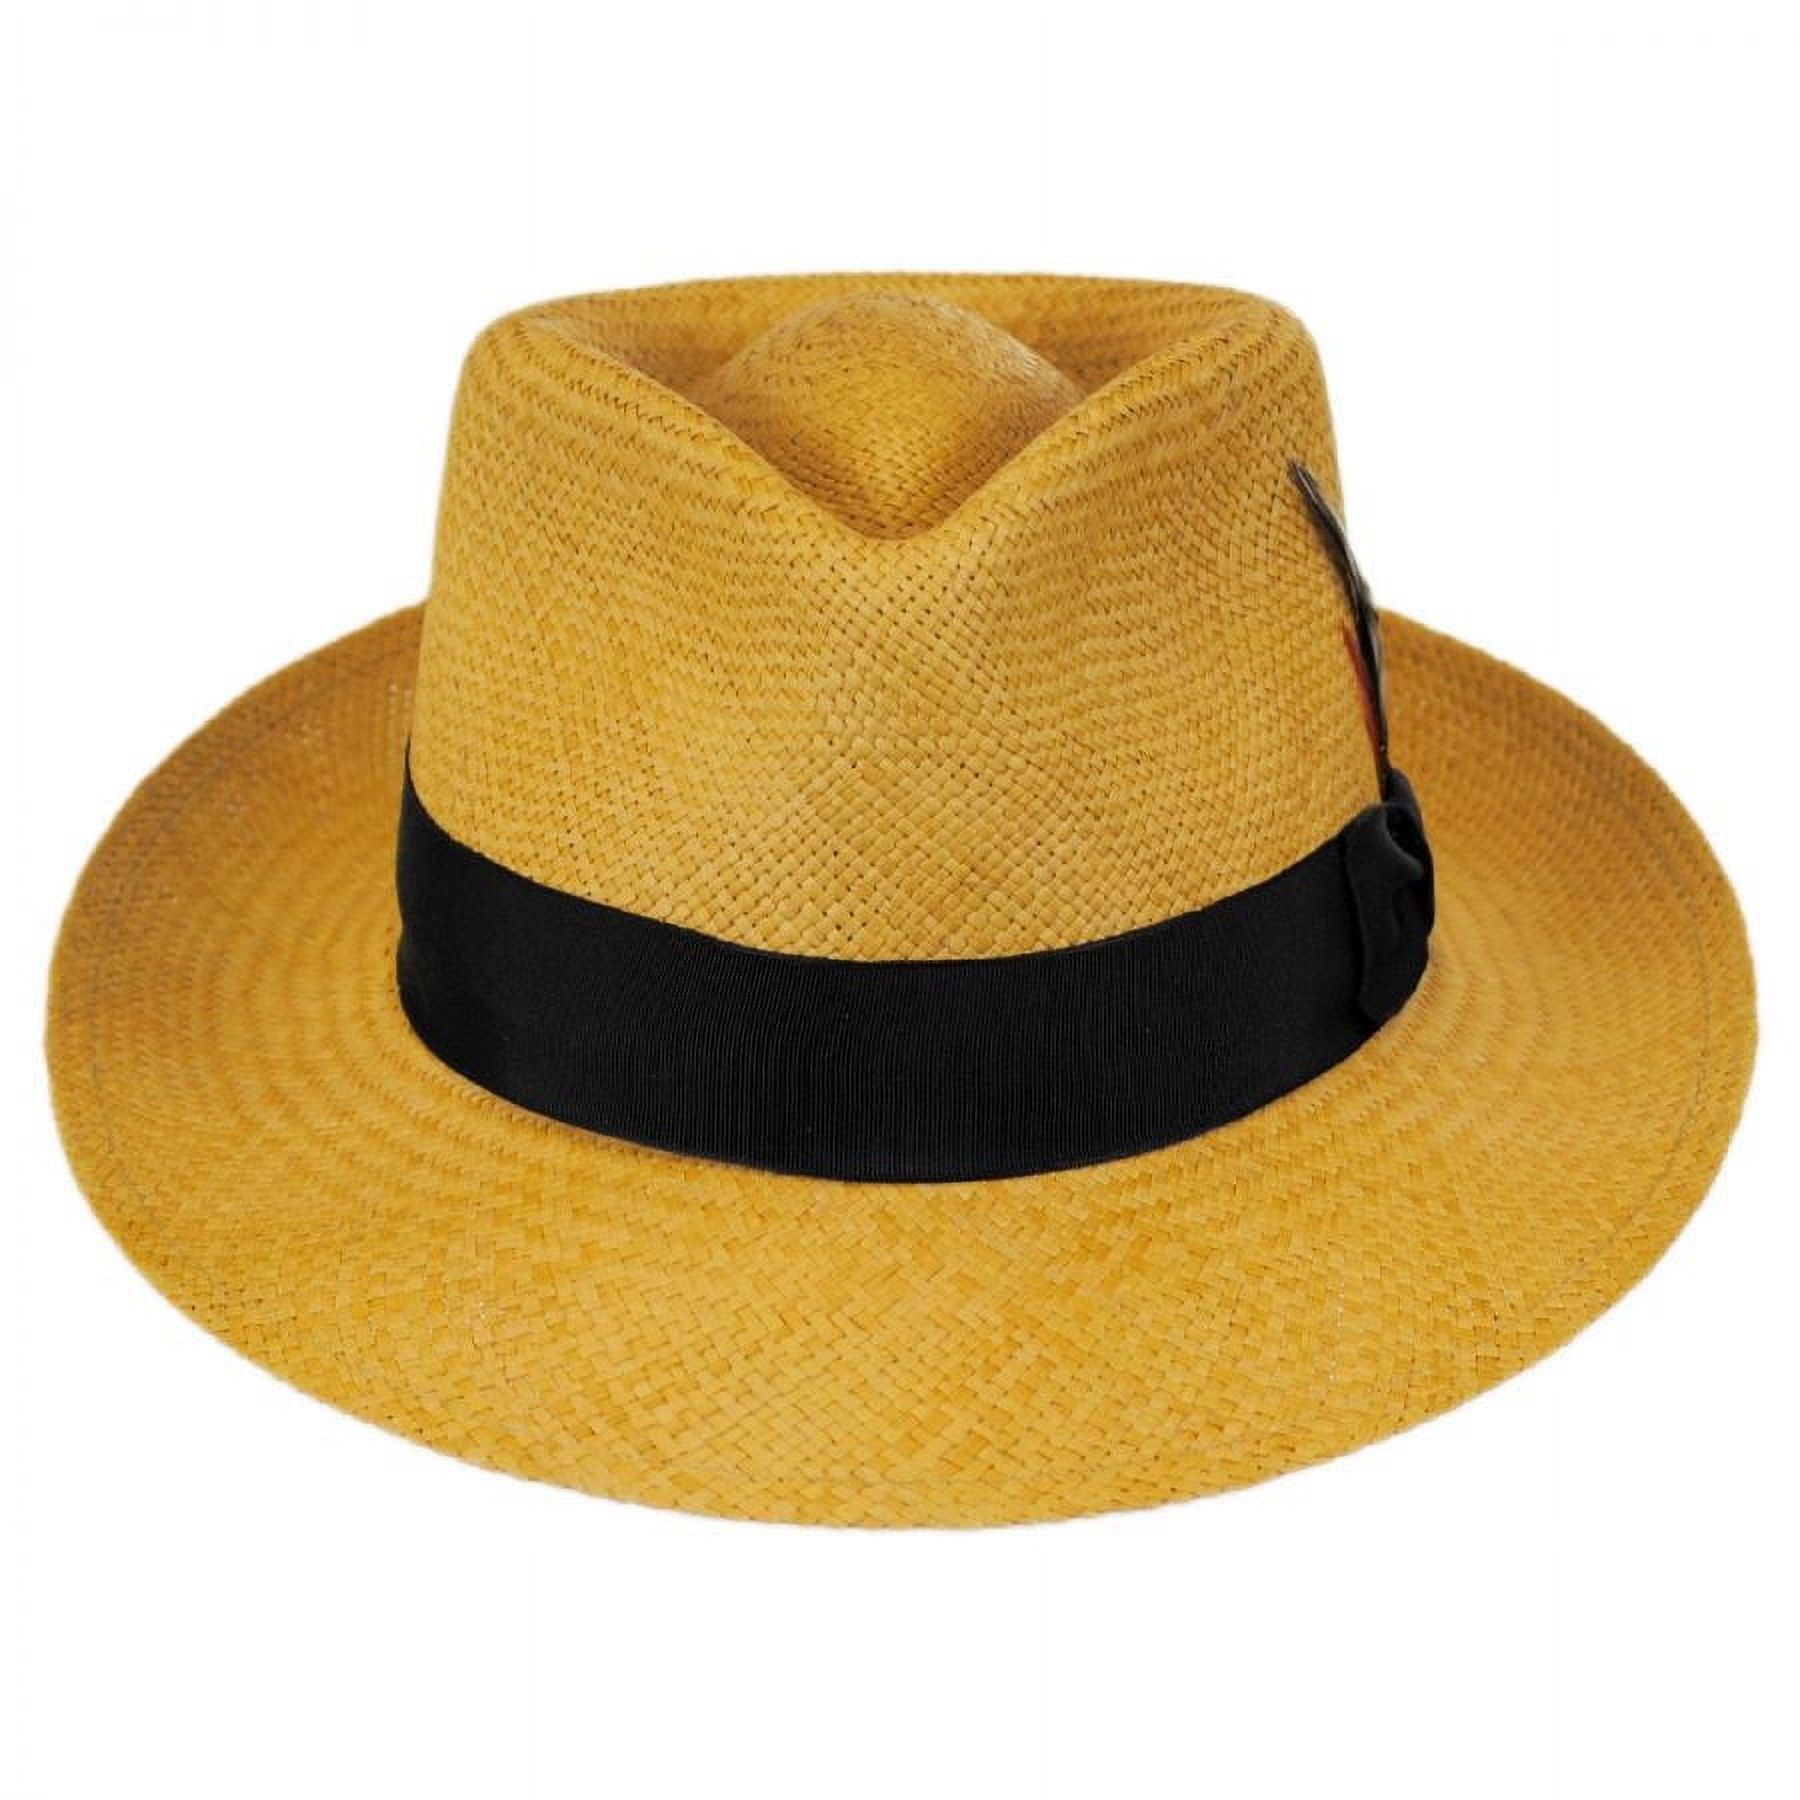 Stain Repellent Panama Straw C-Crown Fedora Hat - M - Putty - image 2 of 4